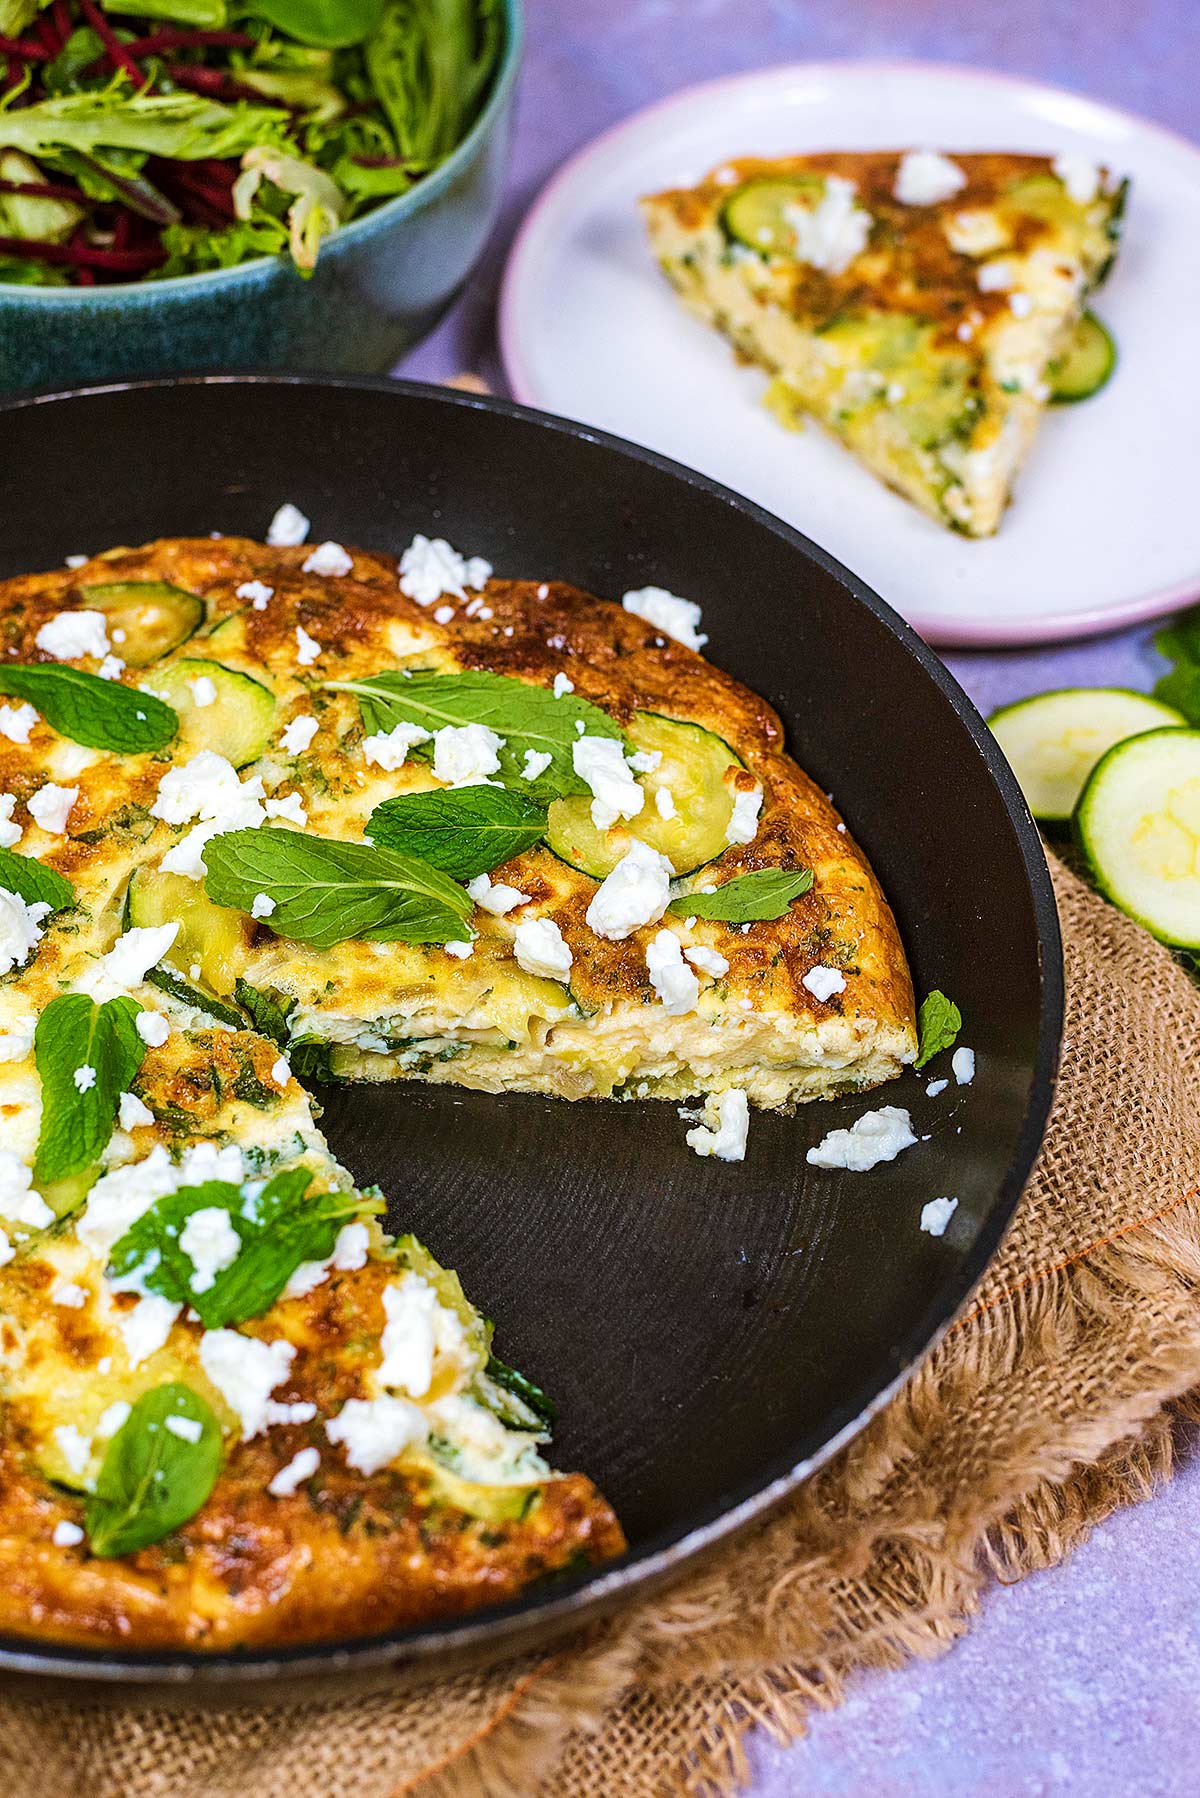 A pan of cooked frittata with a slice removed and put on a plate in the background.